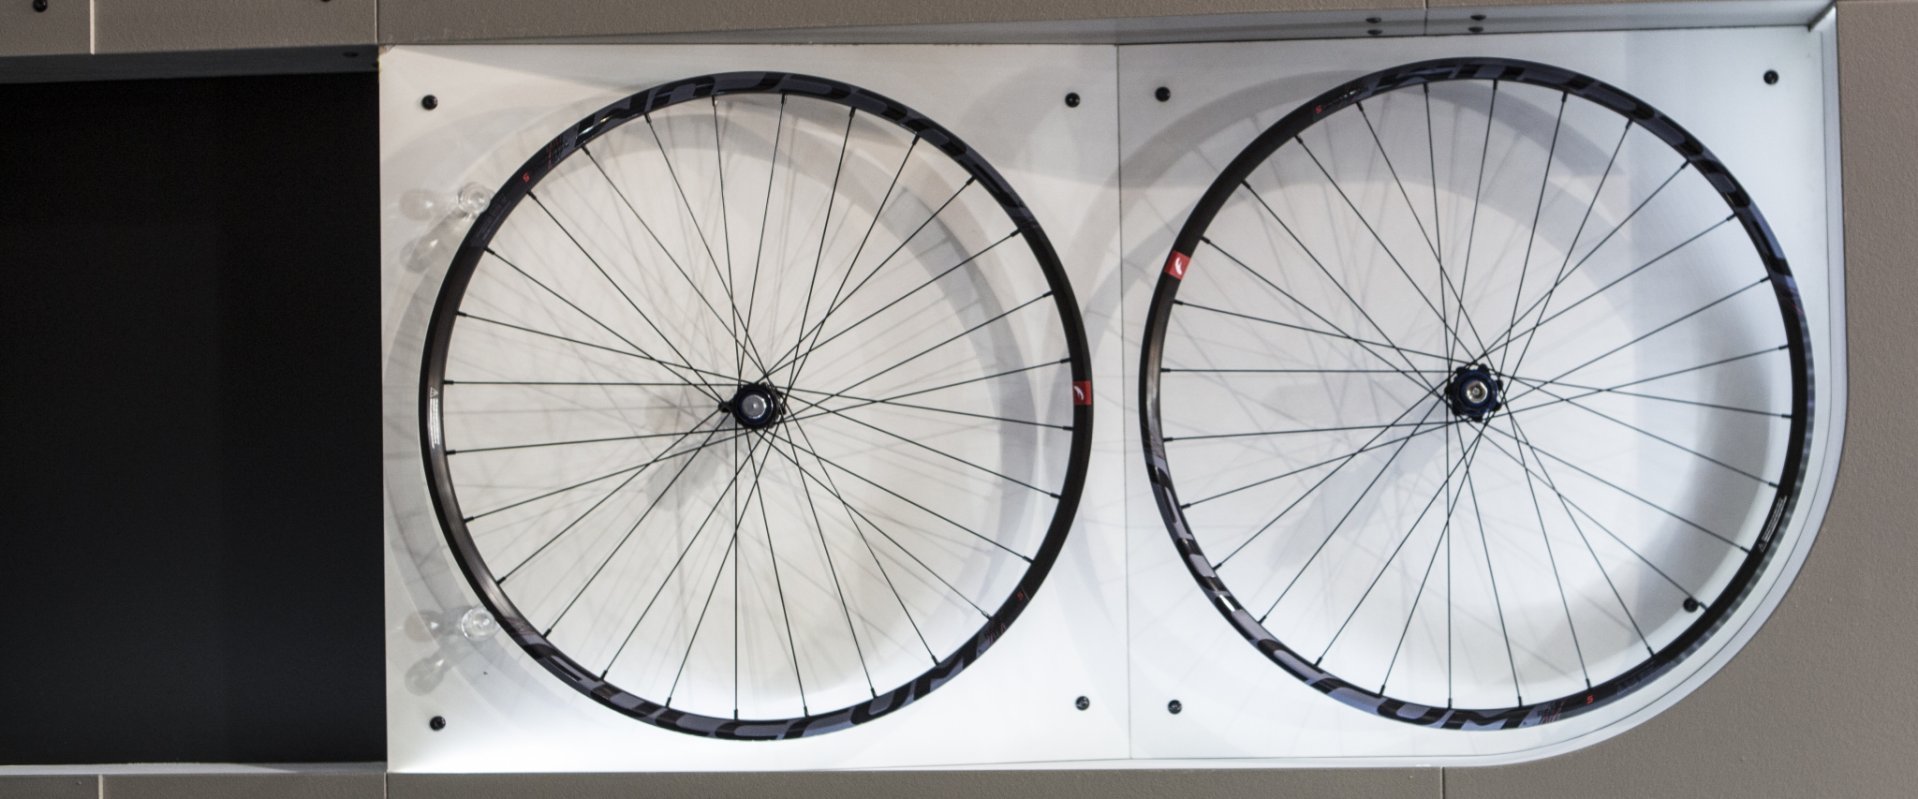 The Red Zone 5 wheelset are a grade upgrade for your XC rig. 